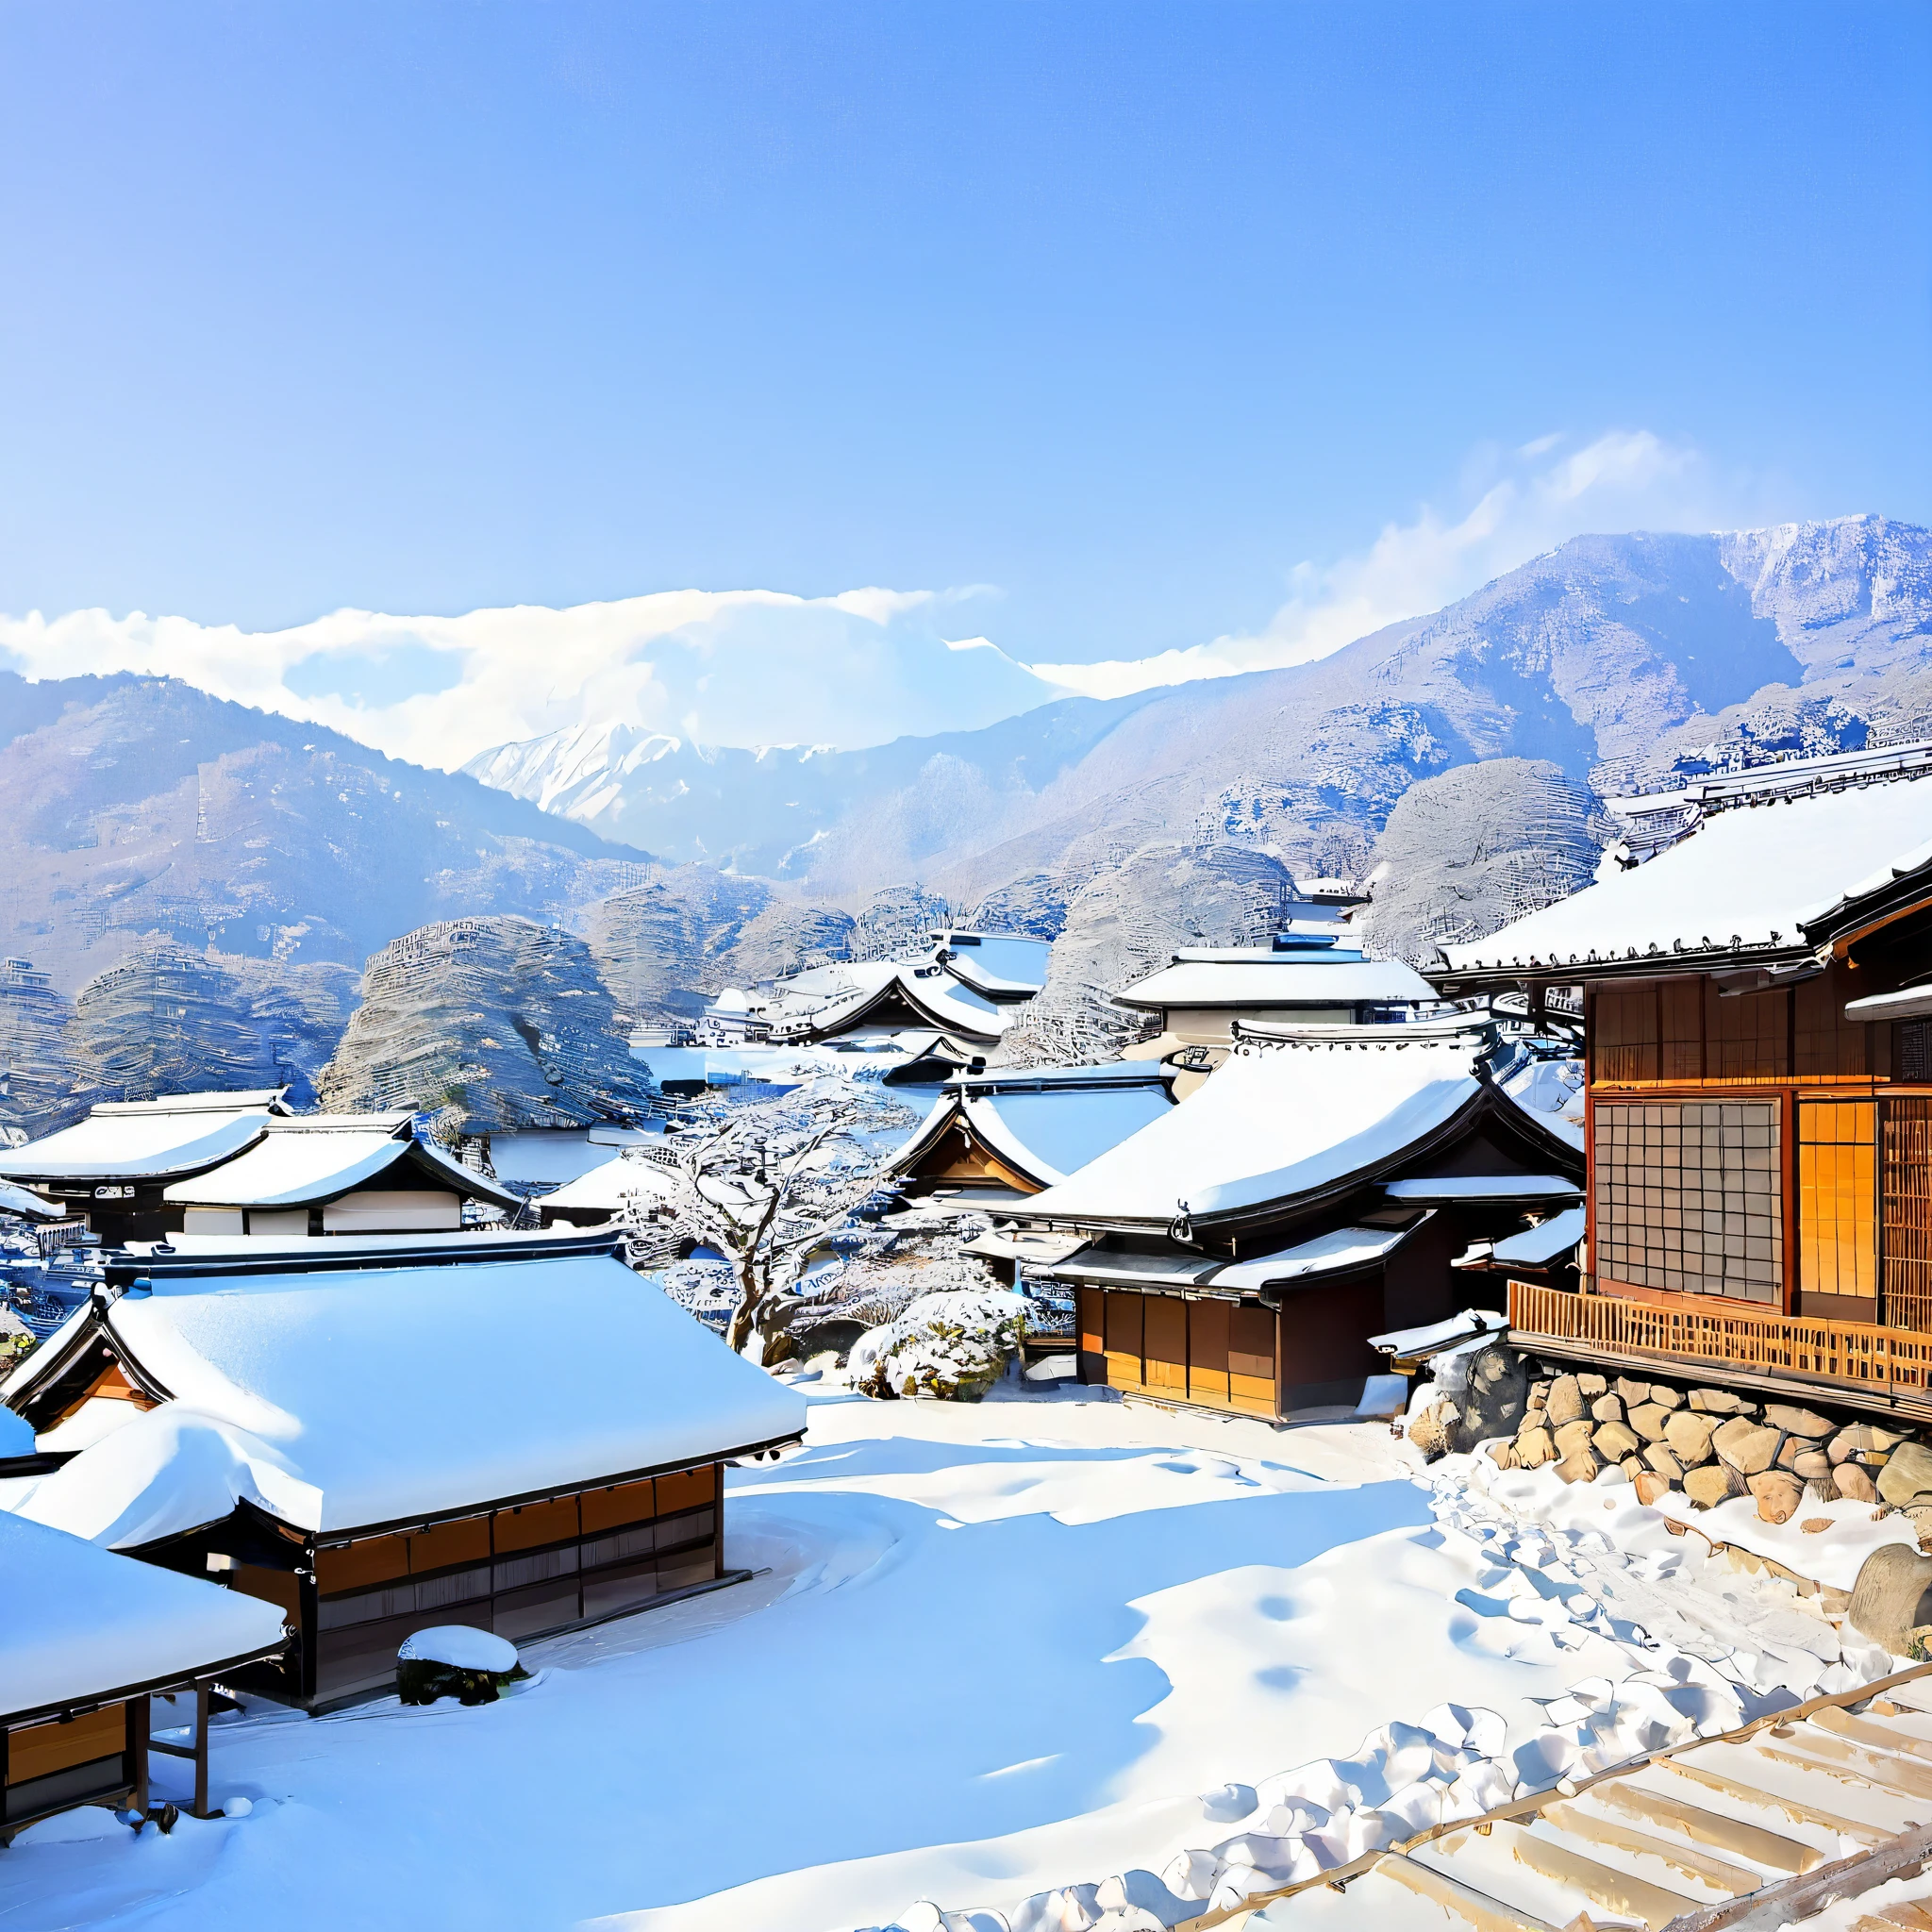 
Describe a winter landscape in Japan, using characteristic elements of the season and the region. Include details such as snow-covered mountains, trees adorned with snowflakes, a clear and sunny blue sky, a traditional Japanese village in the distance with snow-covered roofs and the gentle smoke from chimneys, as well as the presence of wildlife such as squirrels and rabbits. Convey the feeling of serenity, magic, and untouched beauty that this landscape inspires, using vivid and poetic language.